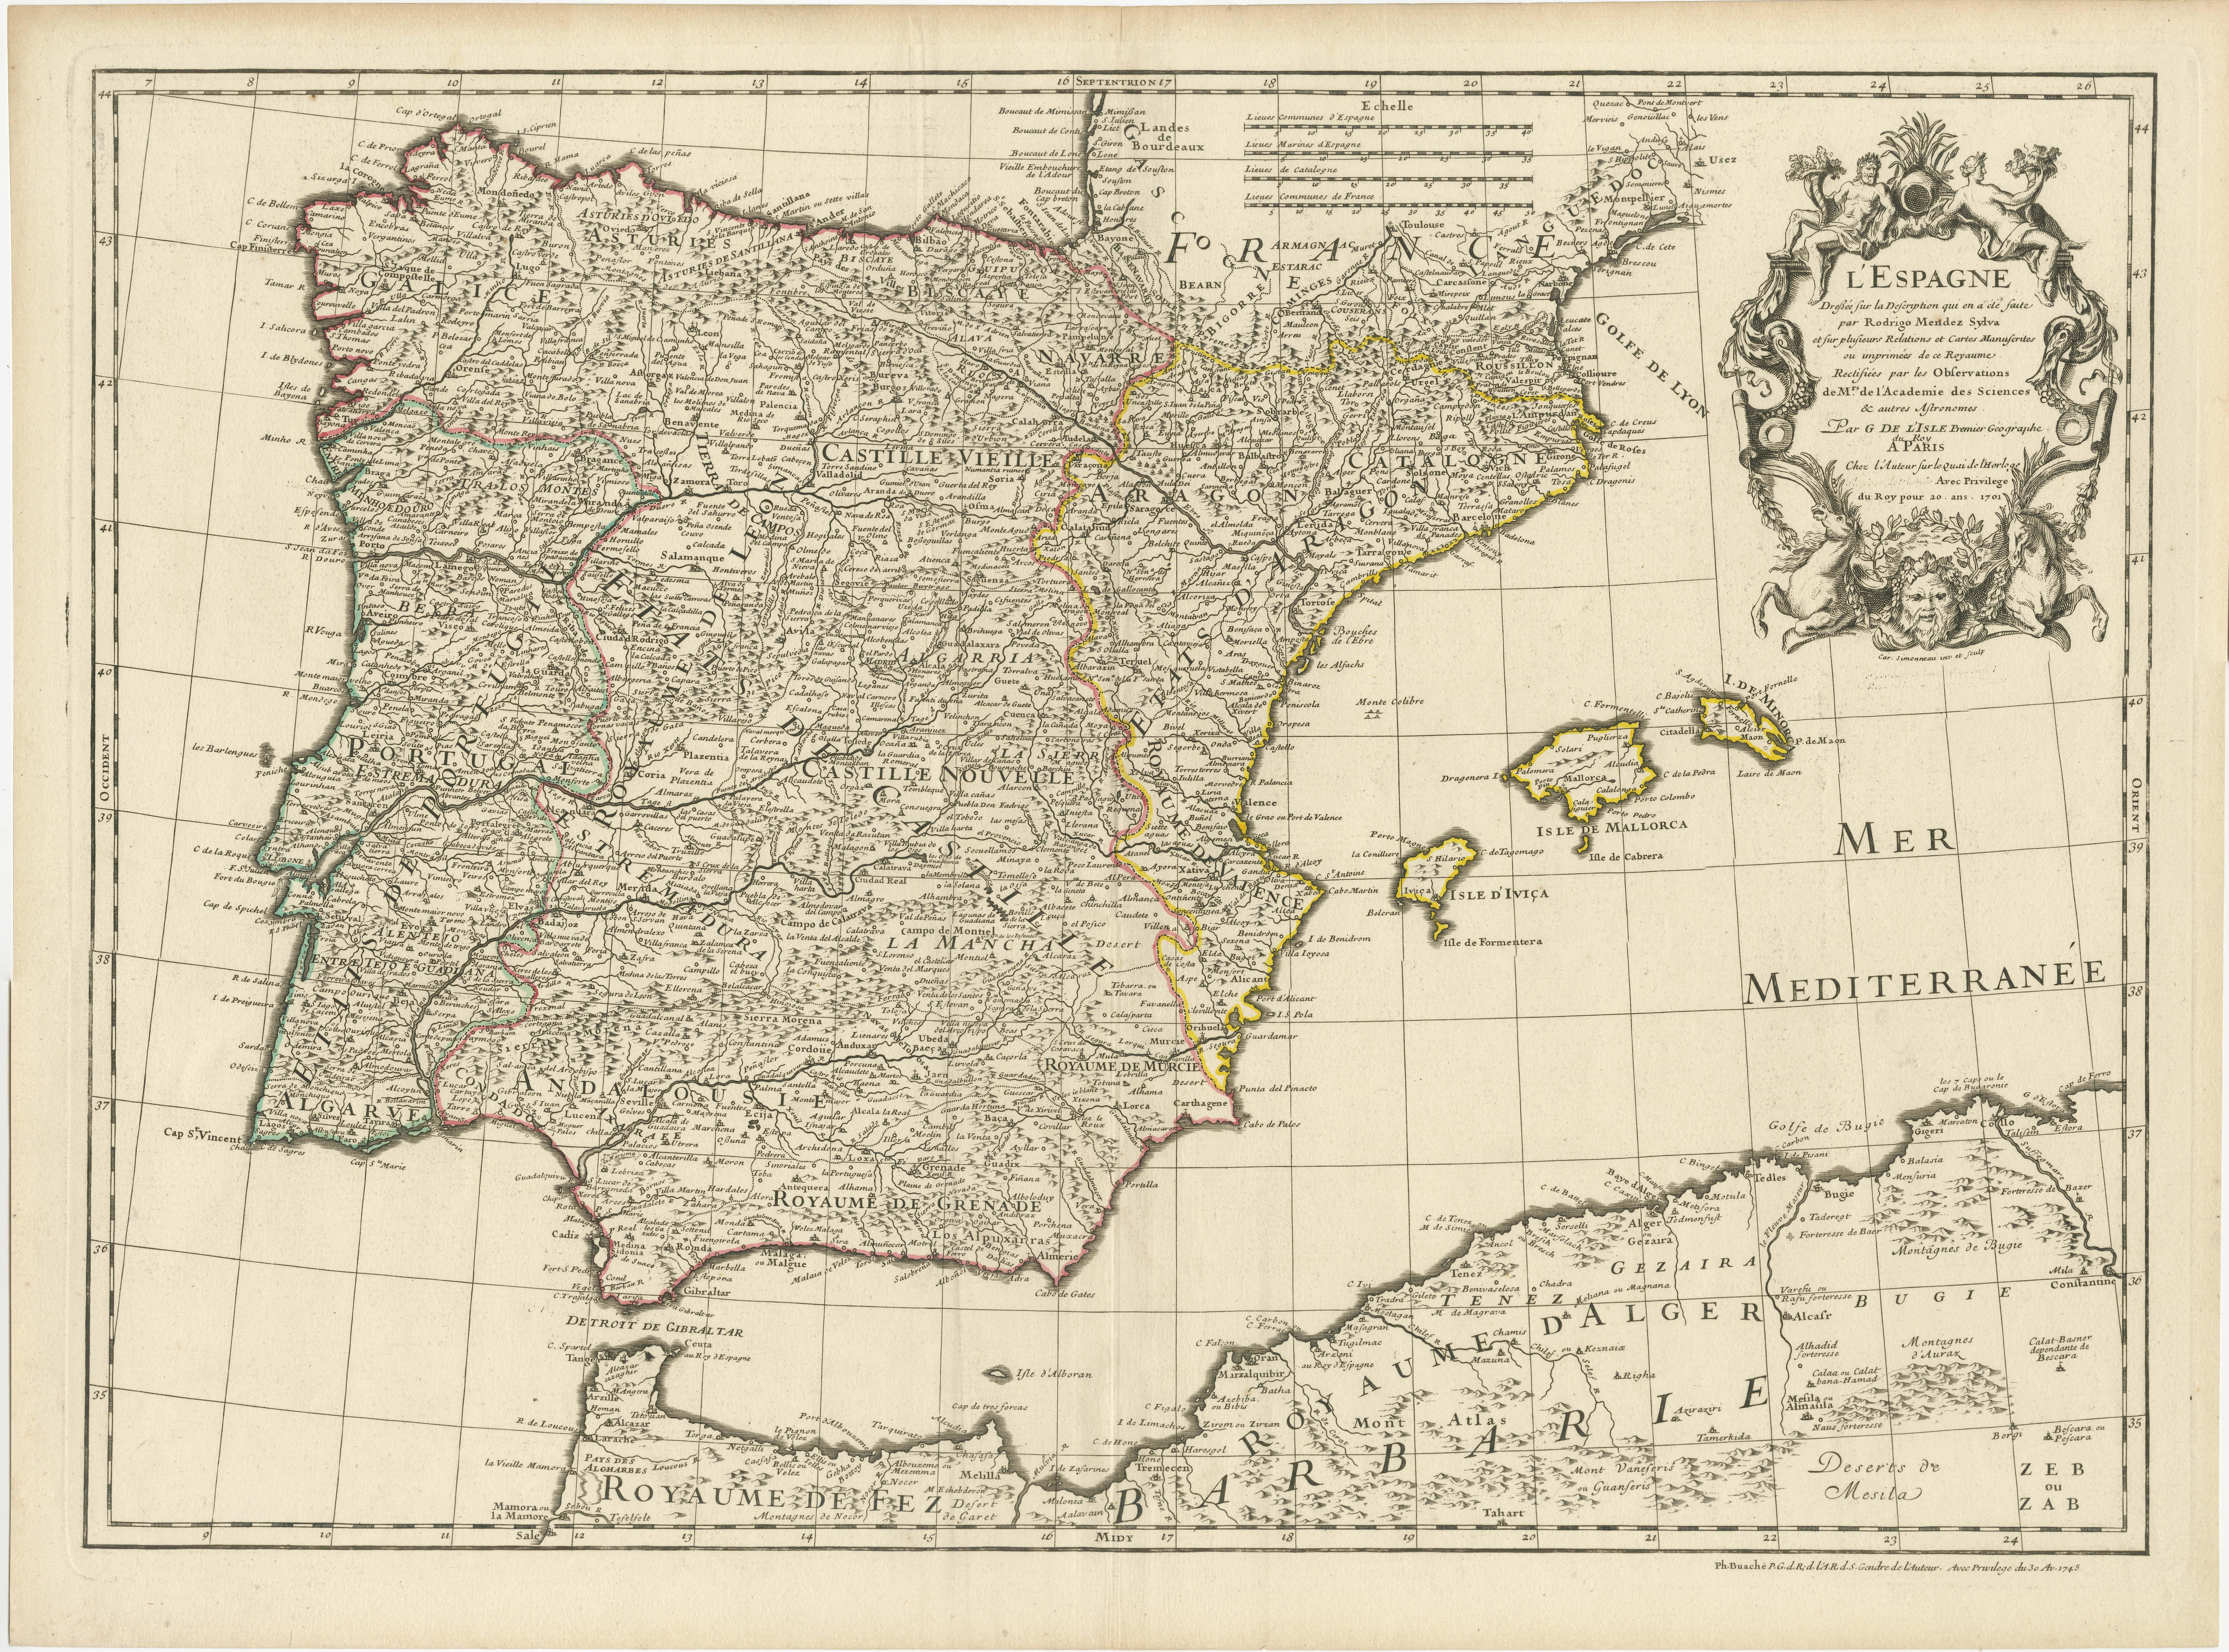 Antique map titled 'L'Espagne (..)'. Large map of the Iberian Peninsula, including the Balearic Islands and part of the north coast of Africa. The map is based on the cartography of Rodrigo Mendez Sylva. The sheet is filled with detail and decorated